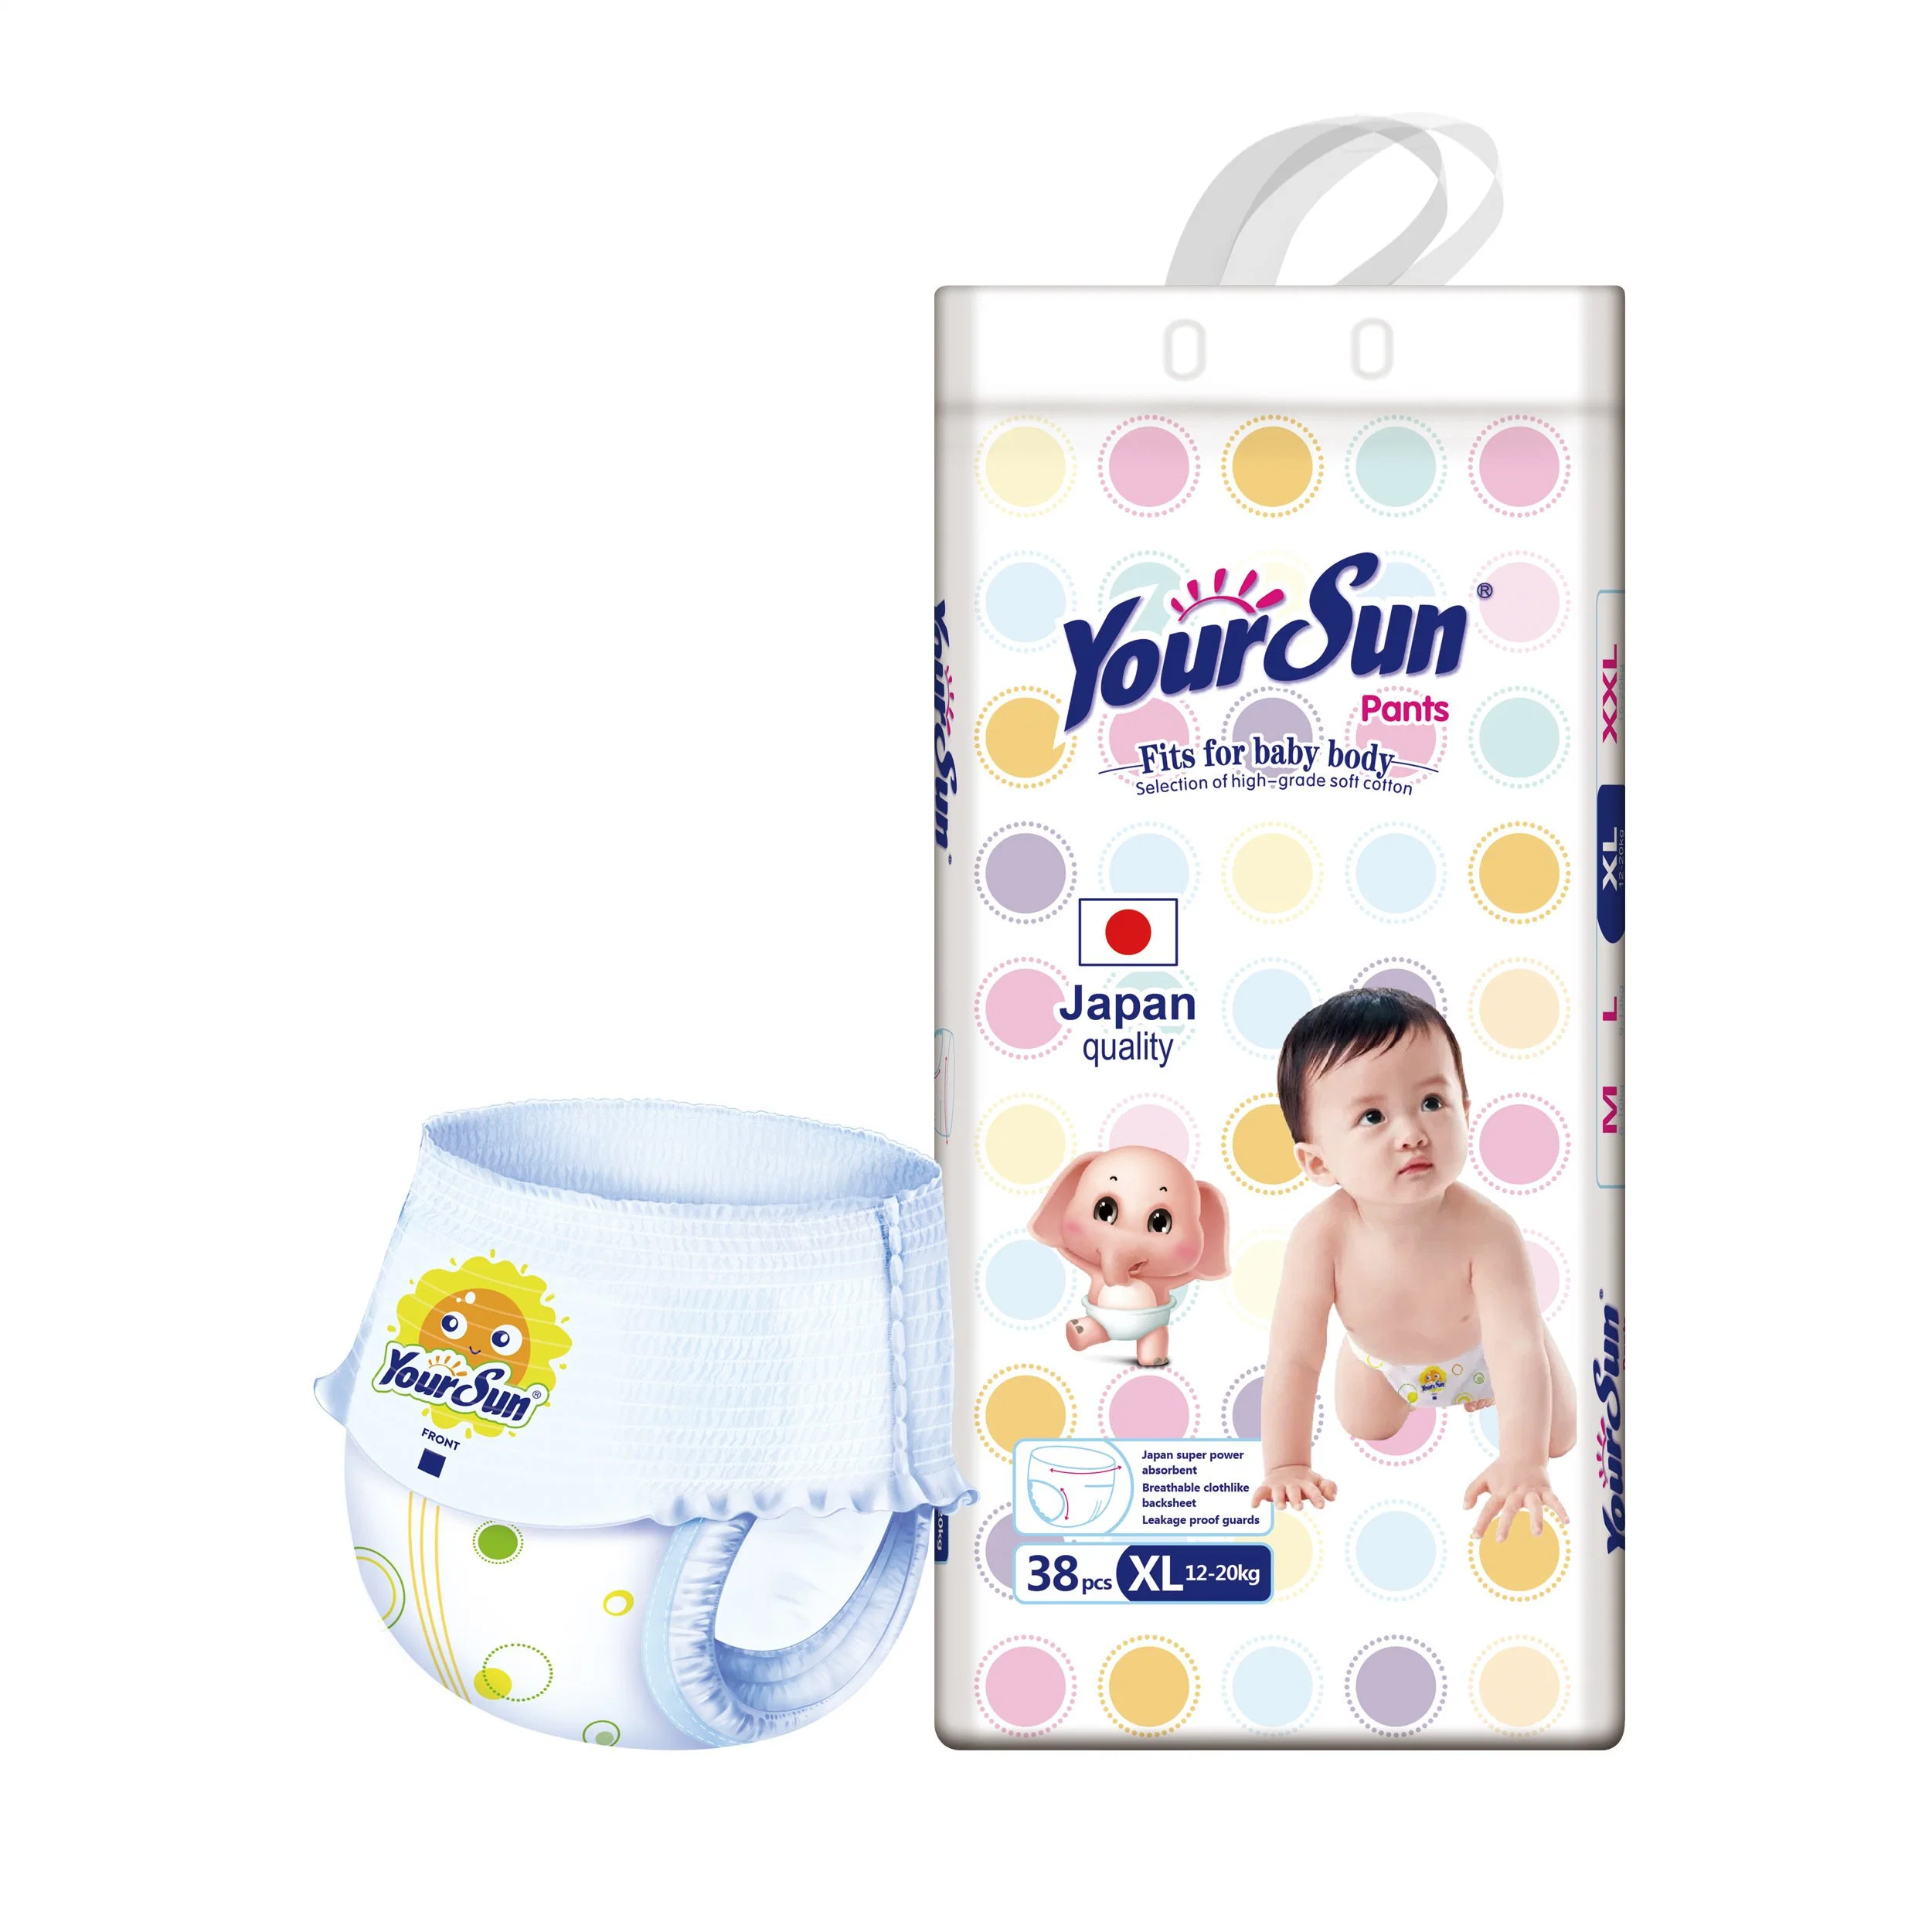 Yoursun Baby Pants Super Soft and Economy Item